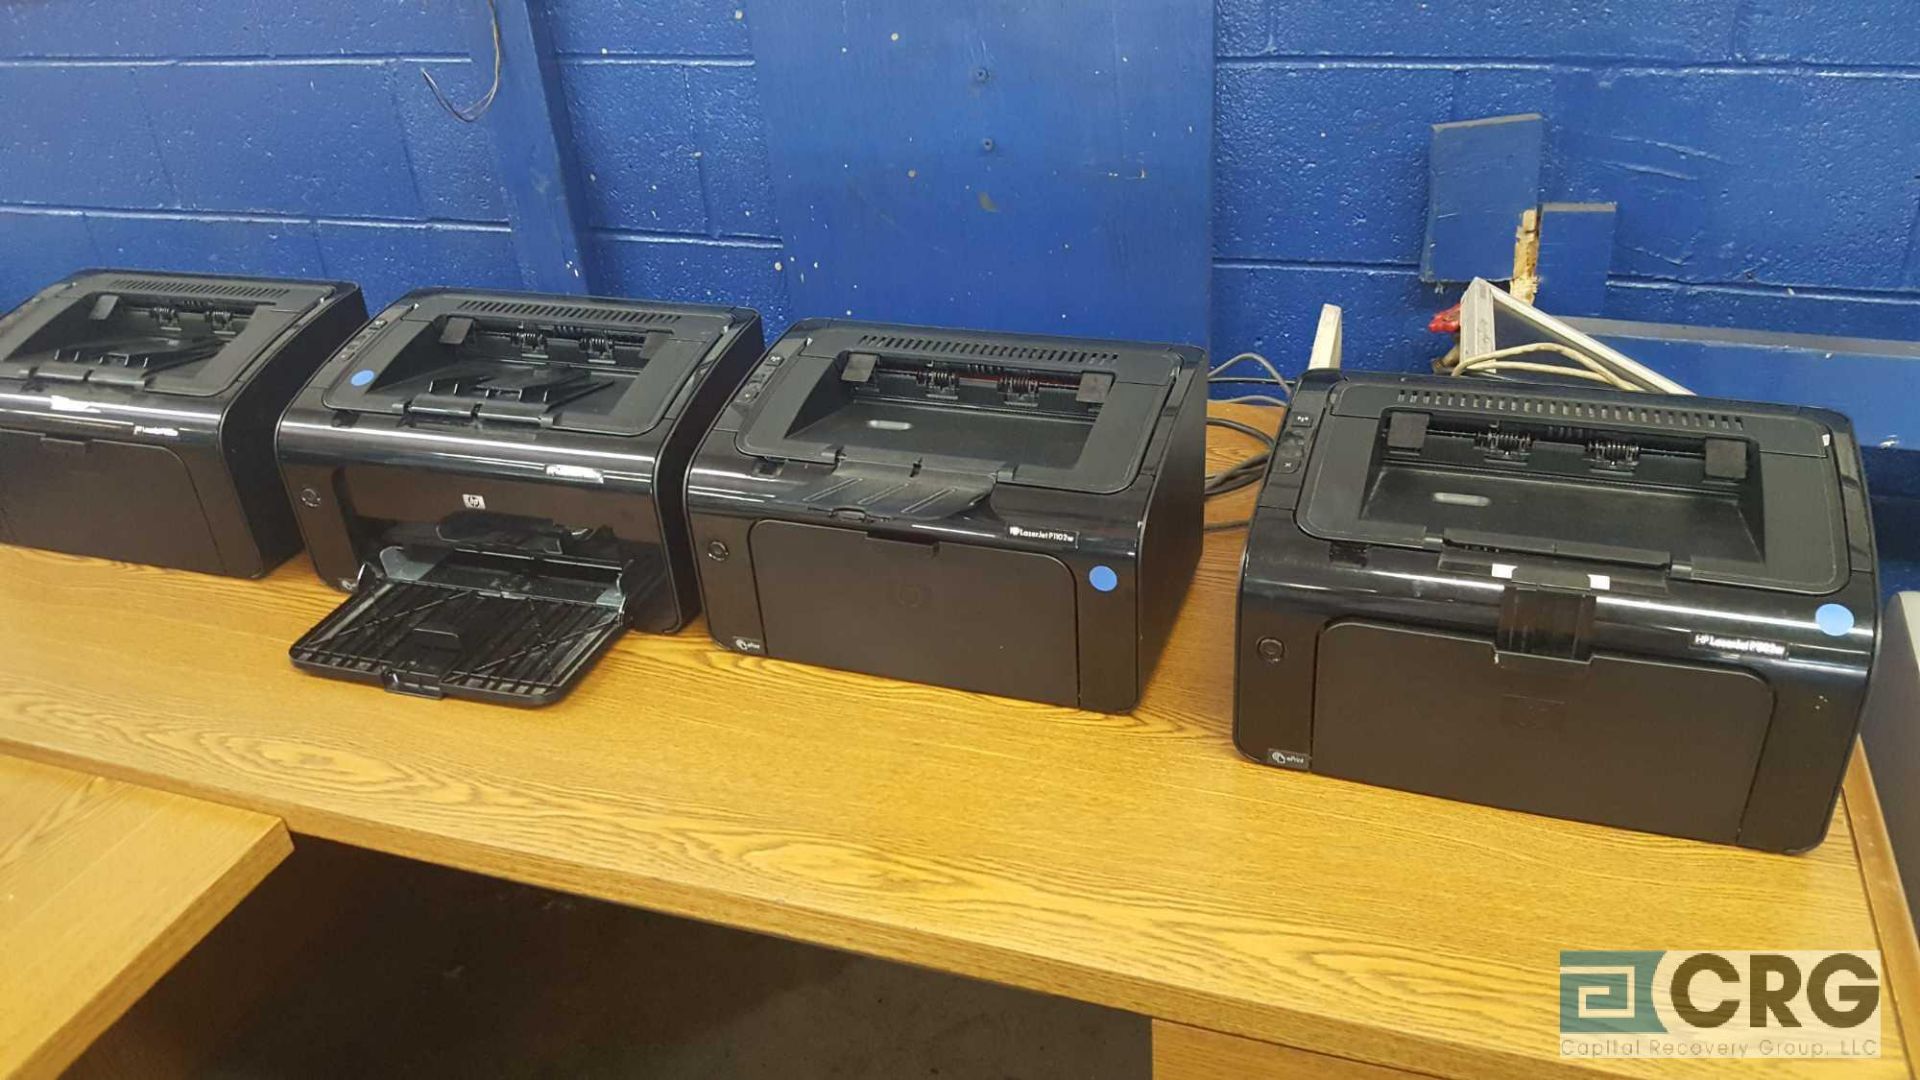 Lot of (6) assorted Hewlett-Packard printers and scanners etc - Image 4 of 4